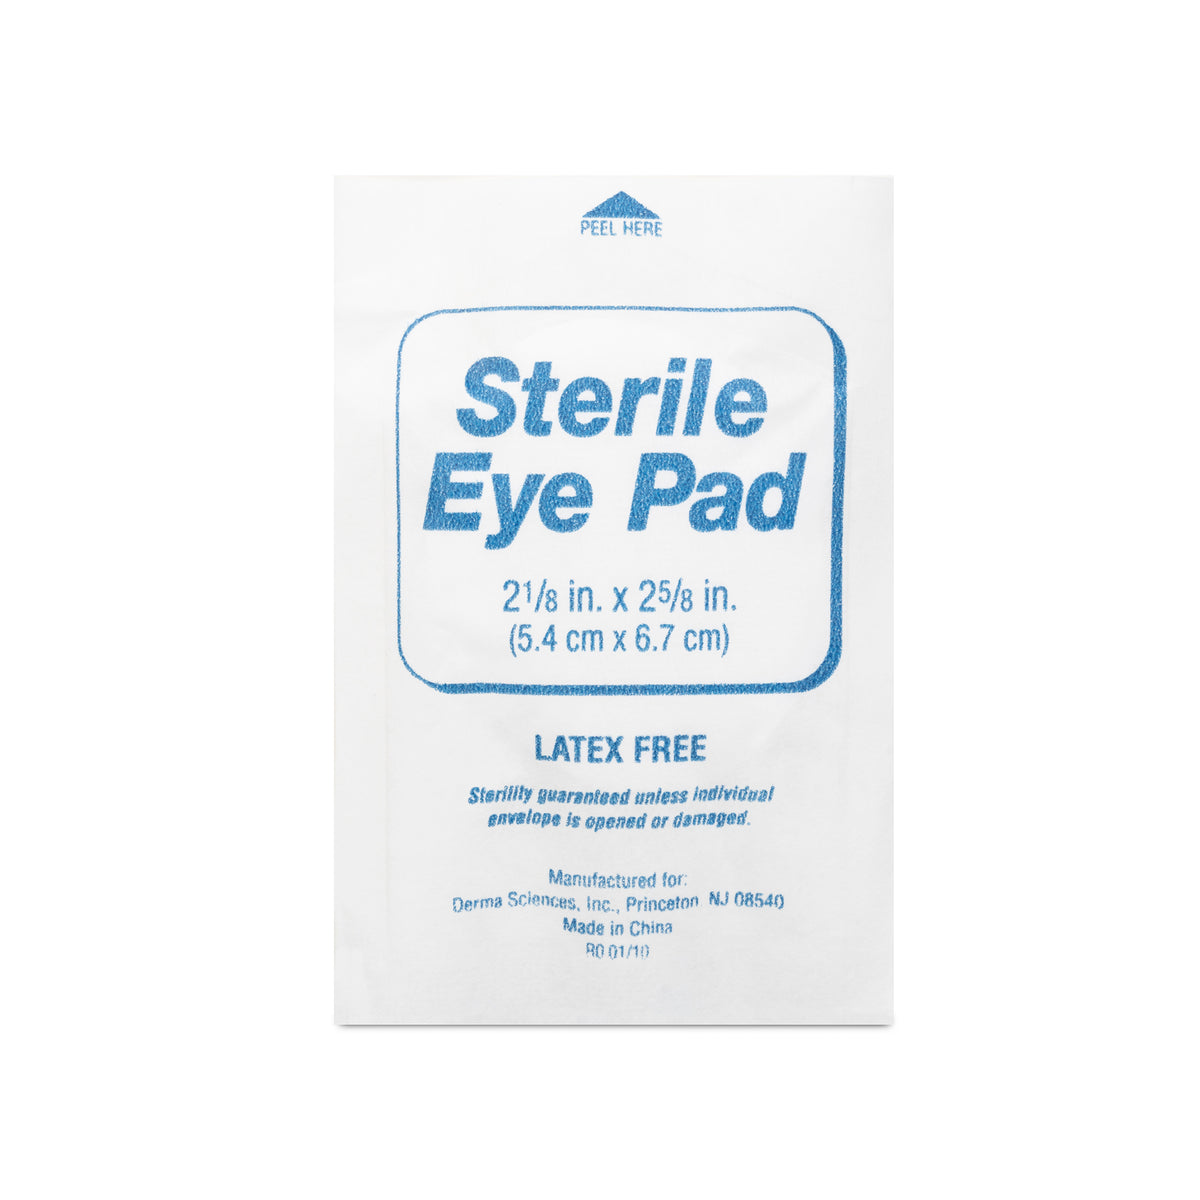 Pad Eye Large 2 1/8X2 5/8 Sterile Lf - NON21601 - Medical Supply Group